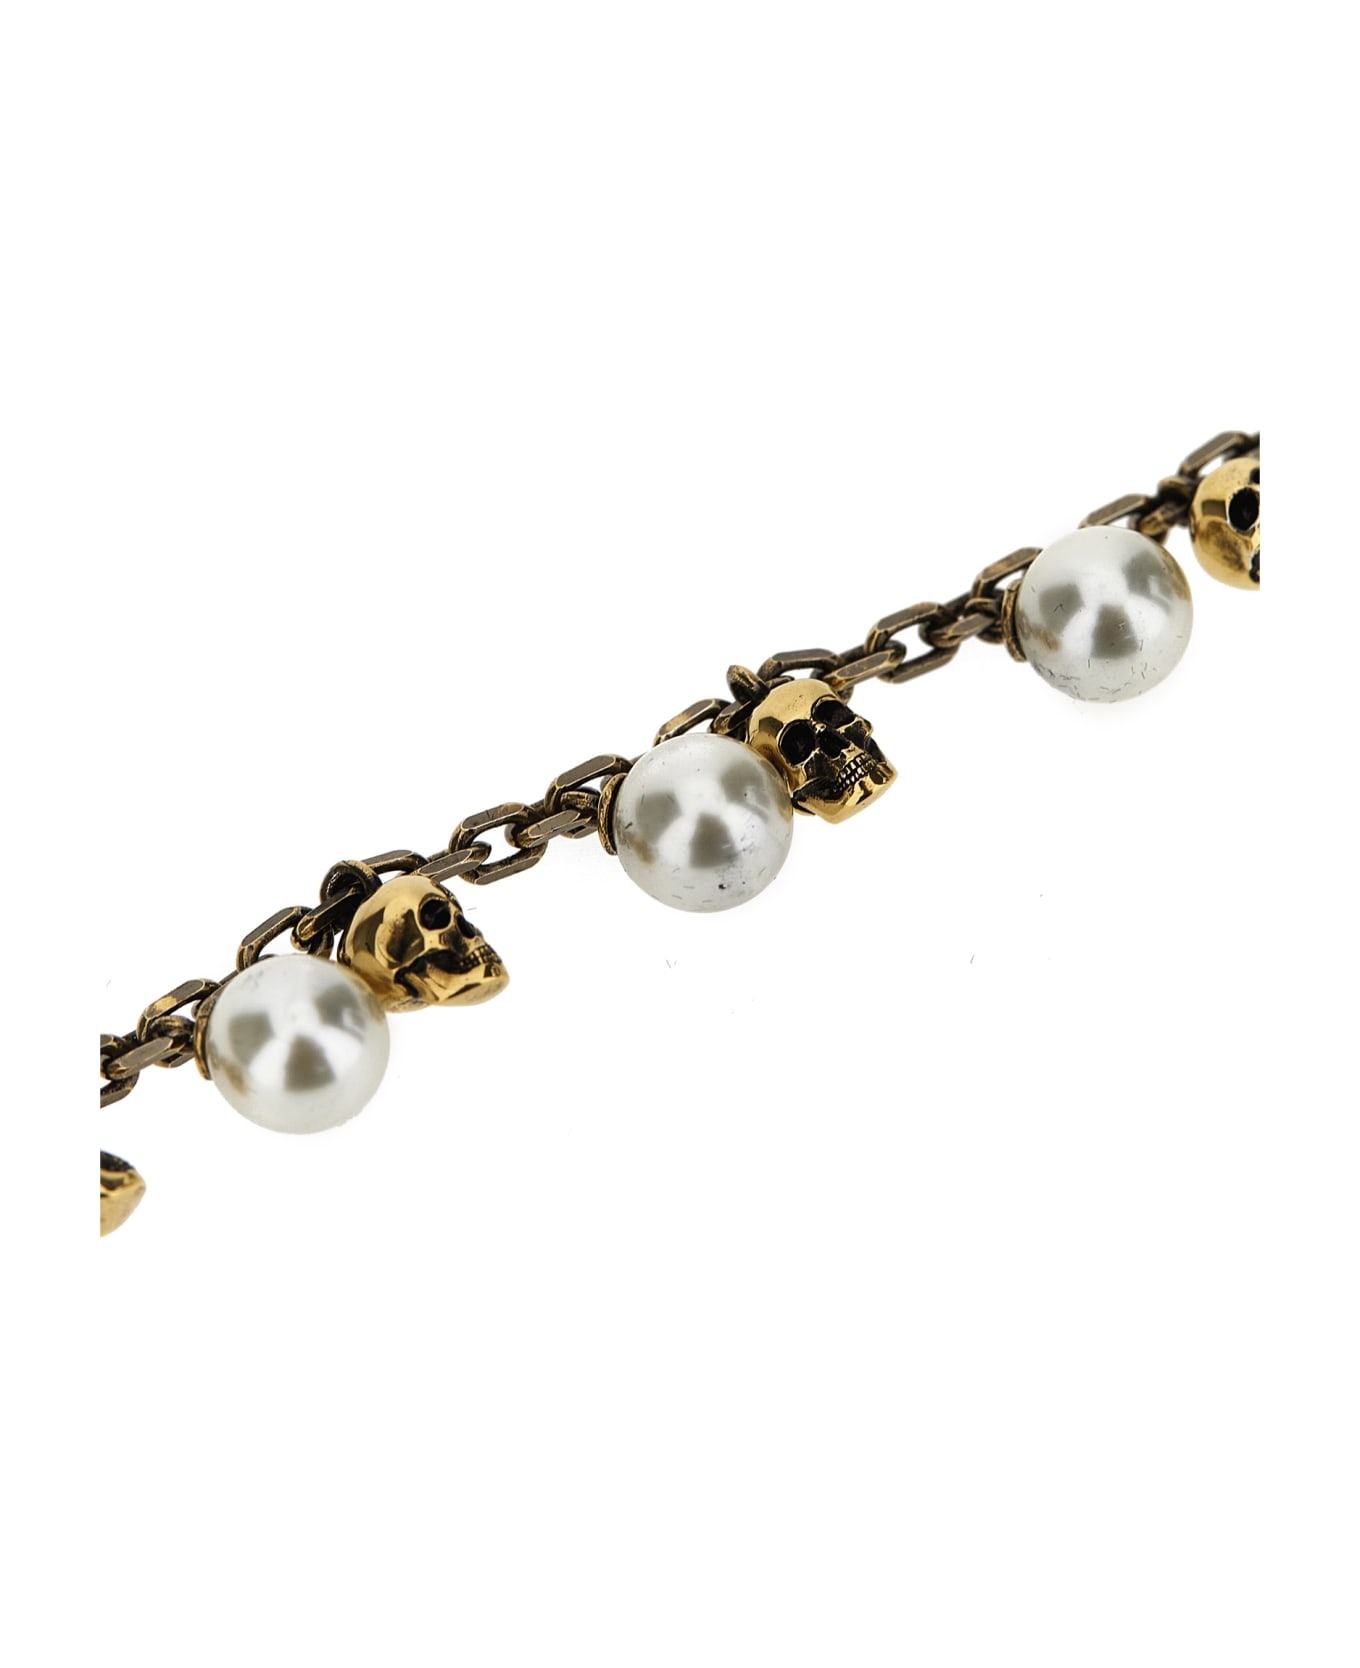 Alexander McQueen Skull And Pearl Necklace - Mix ネックレス